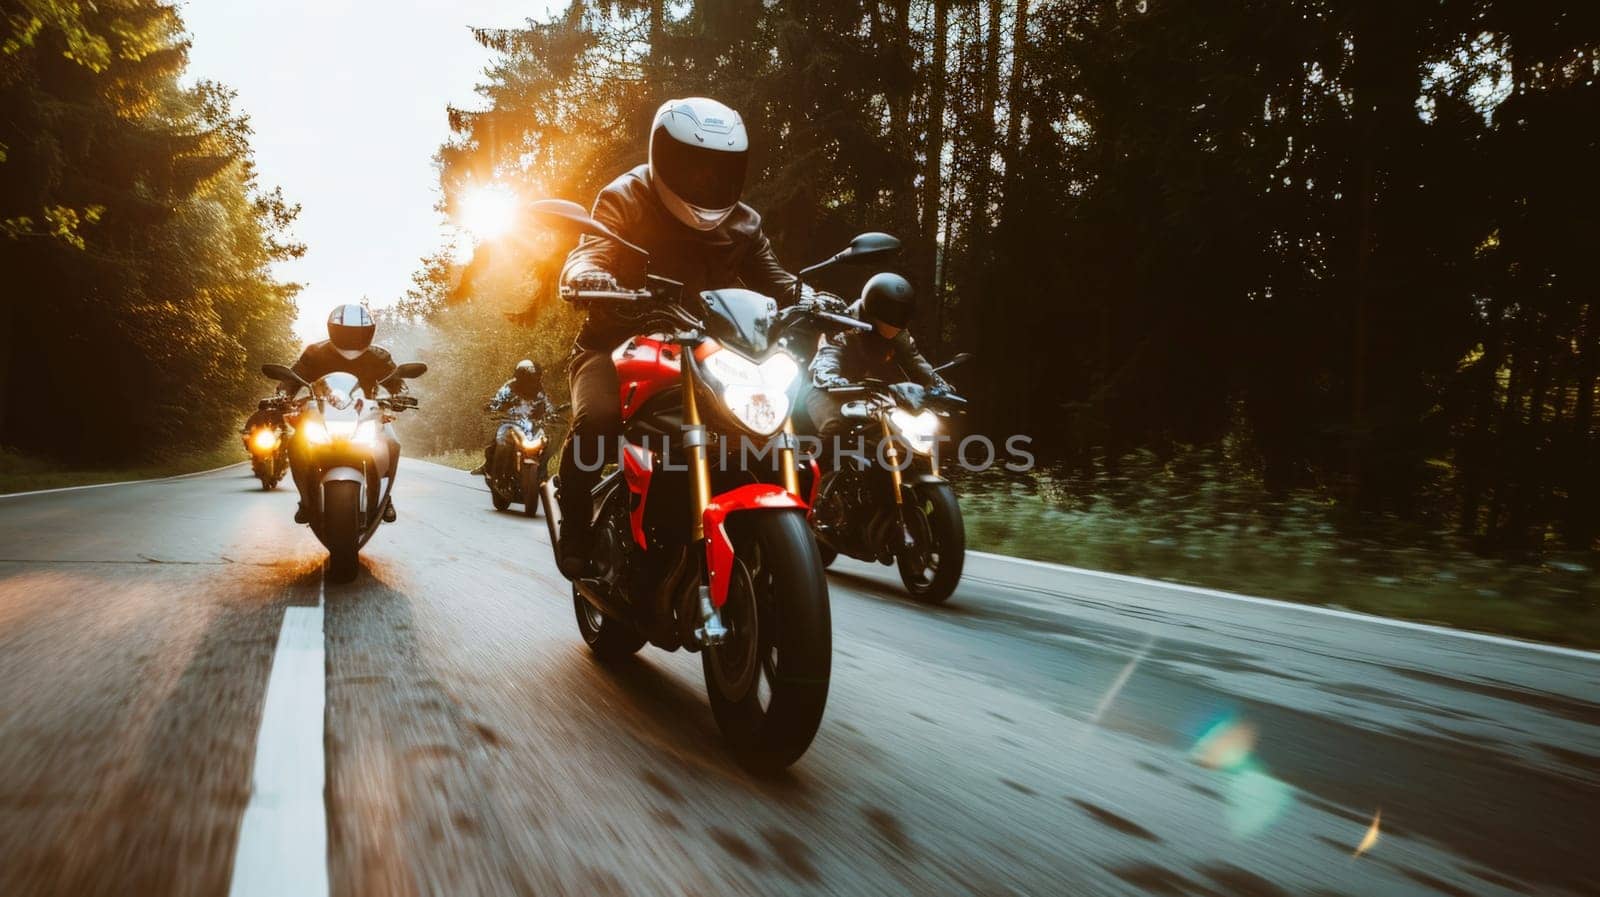 a group of motorcycle riding on the road together, speeding and overtaking, summer activity.